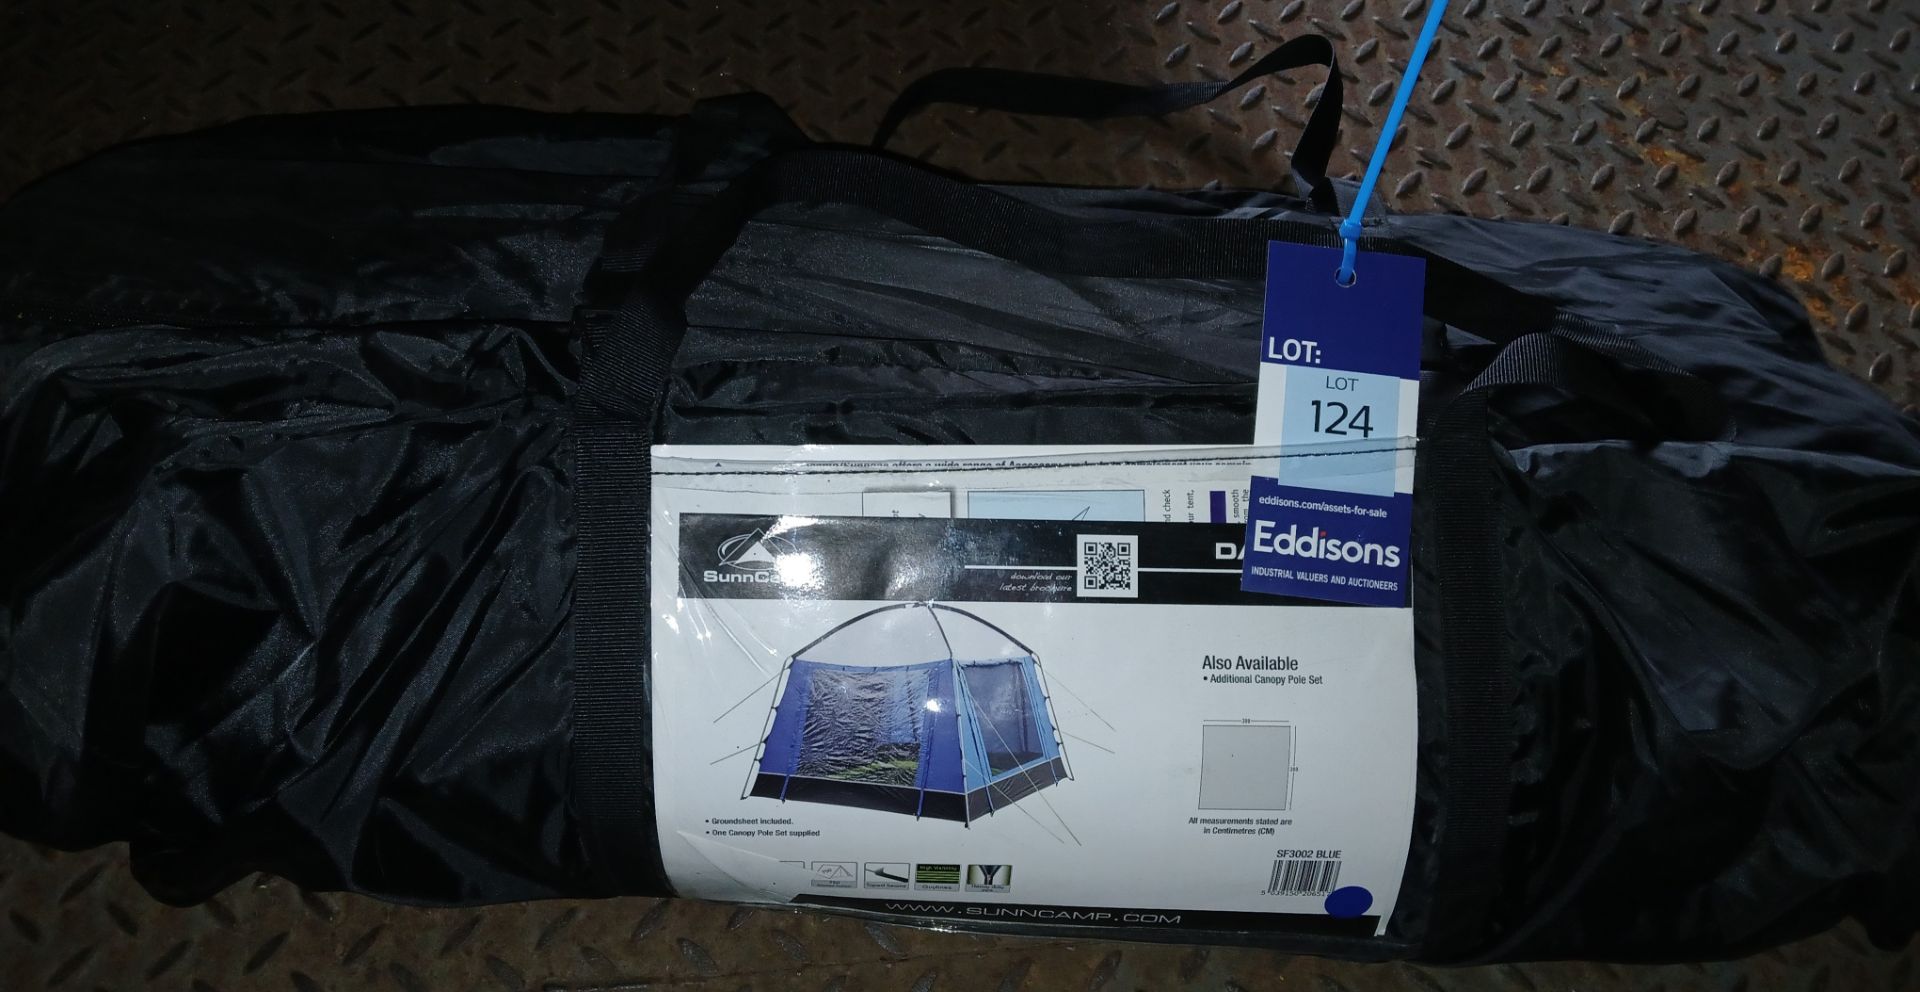 Sunncamp Dayroom Versatile Utility Tent (Please note, Viewing Strongly Recommended - Eddisons have